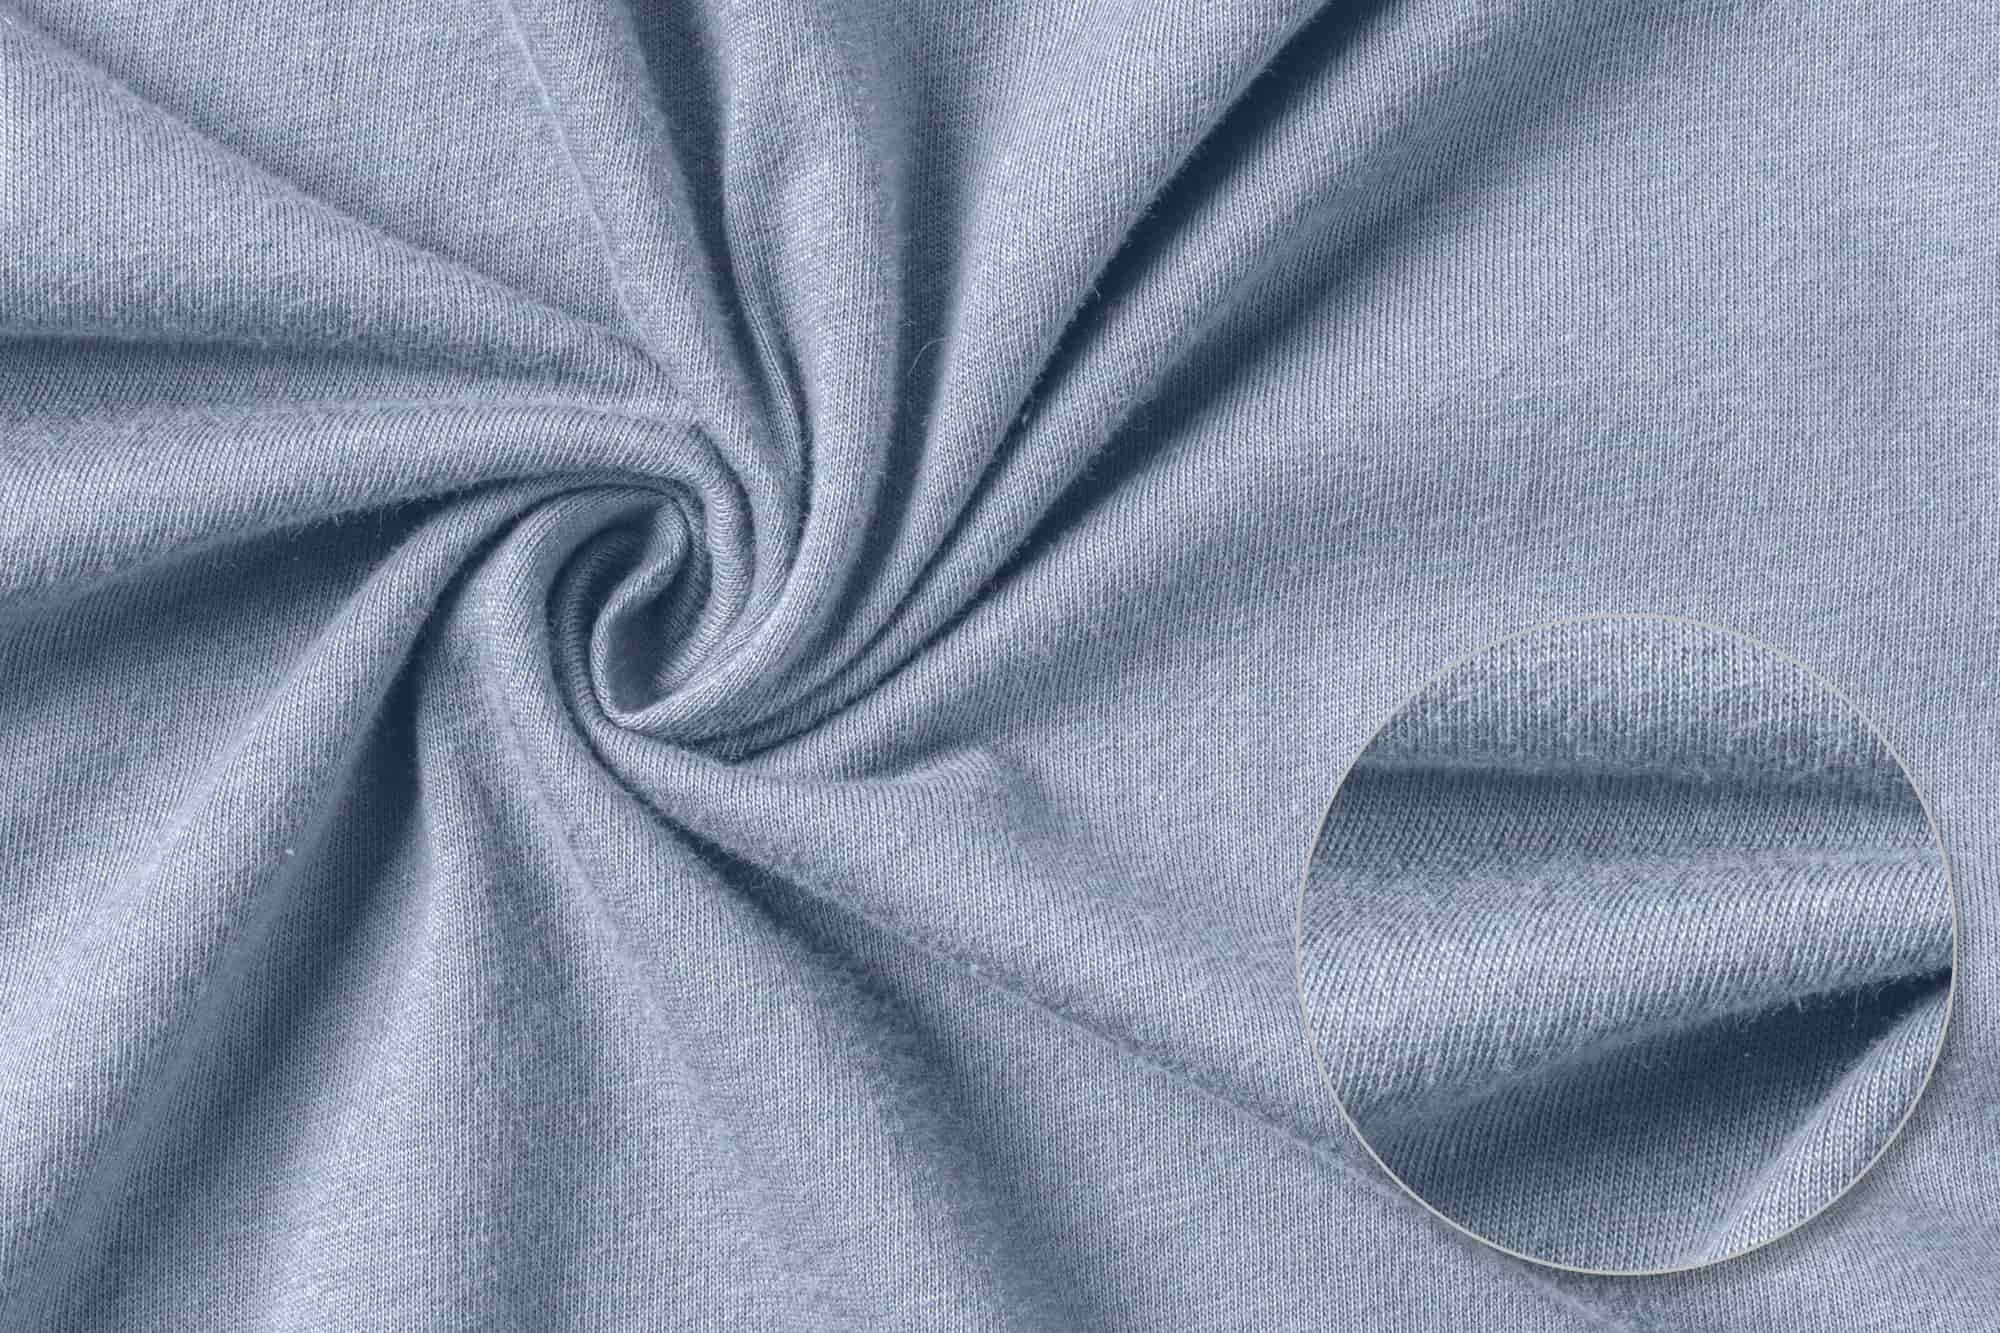 Detail image of the Bella Canvas Jersey T-Shirt's fabric